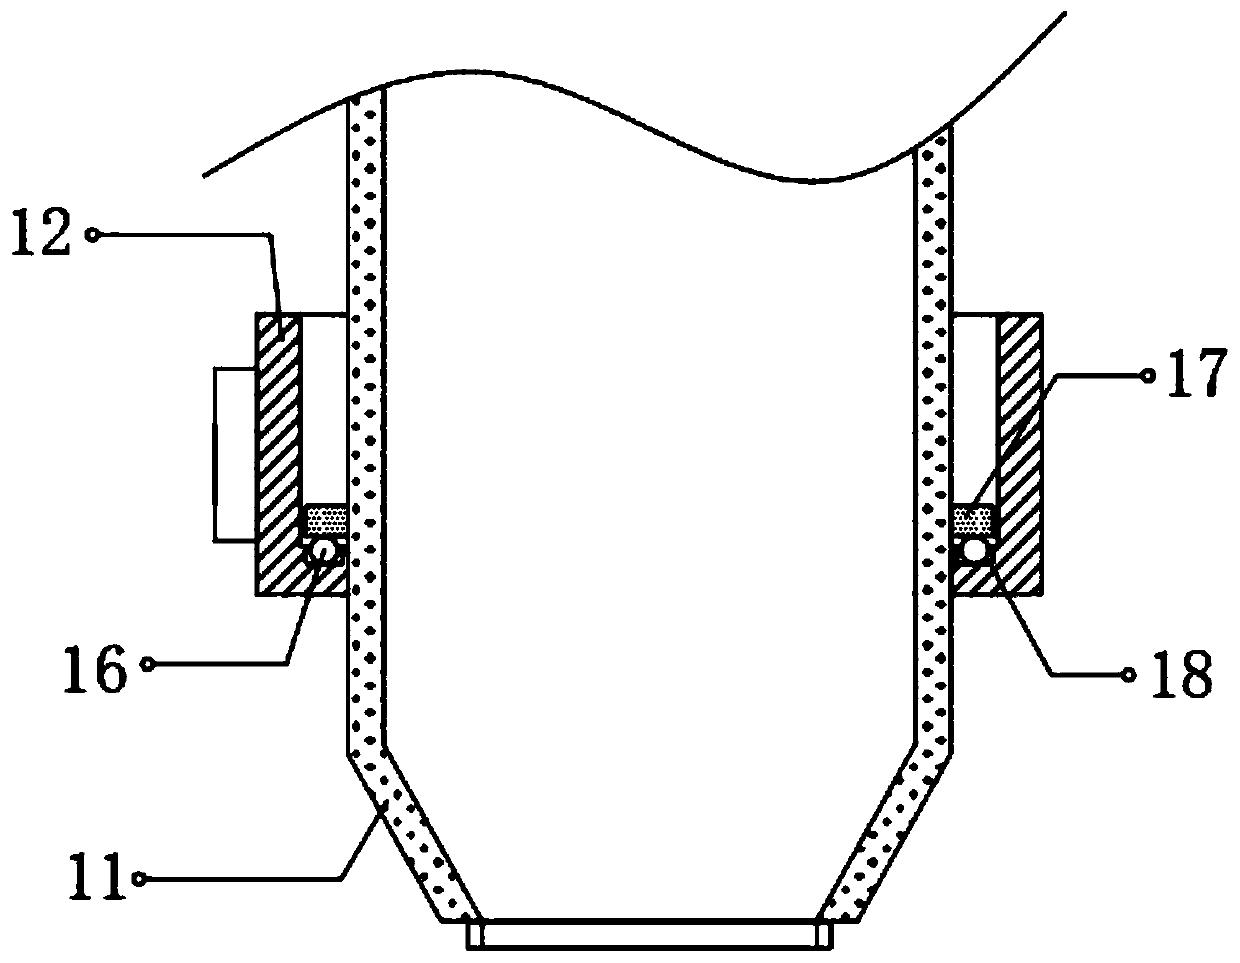 Packaging device for freeze-dried food